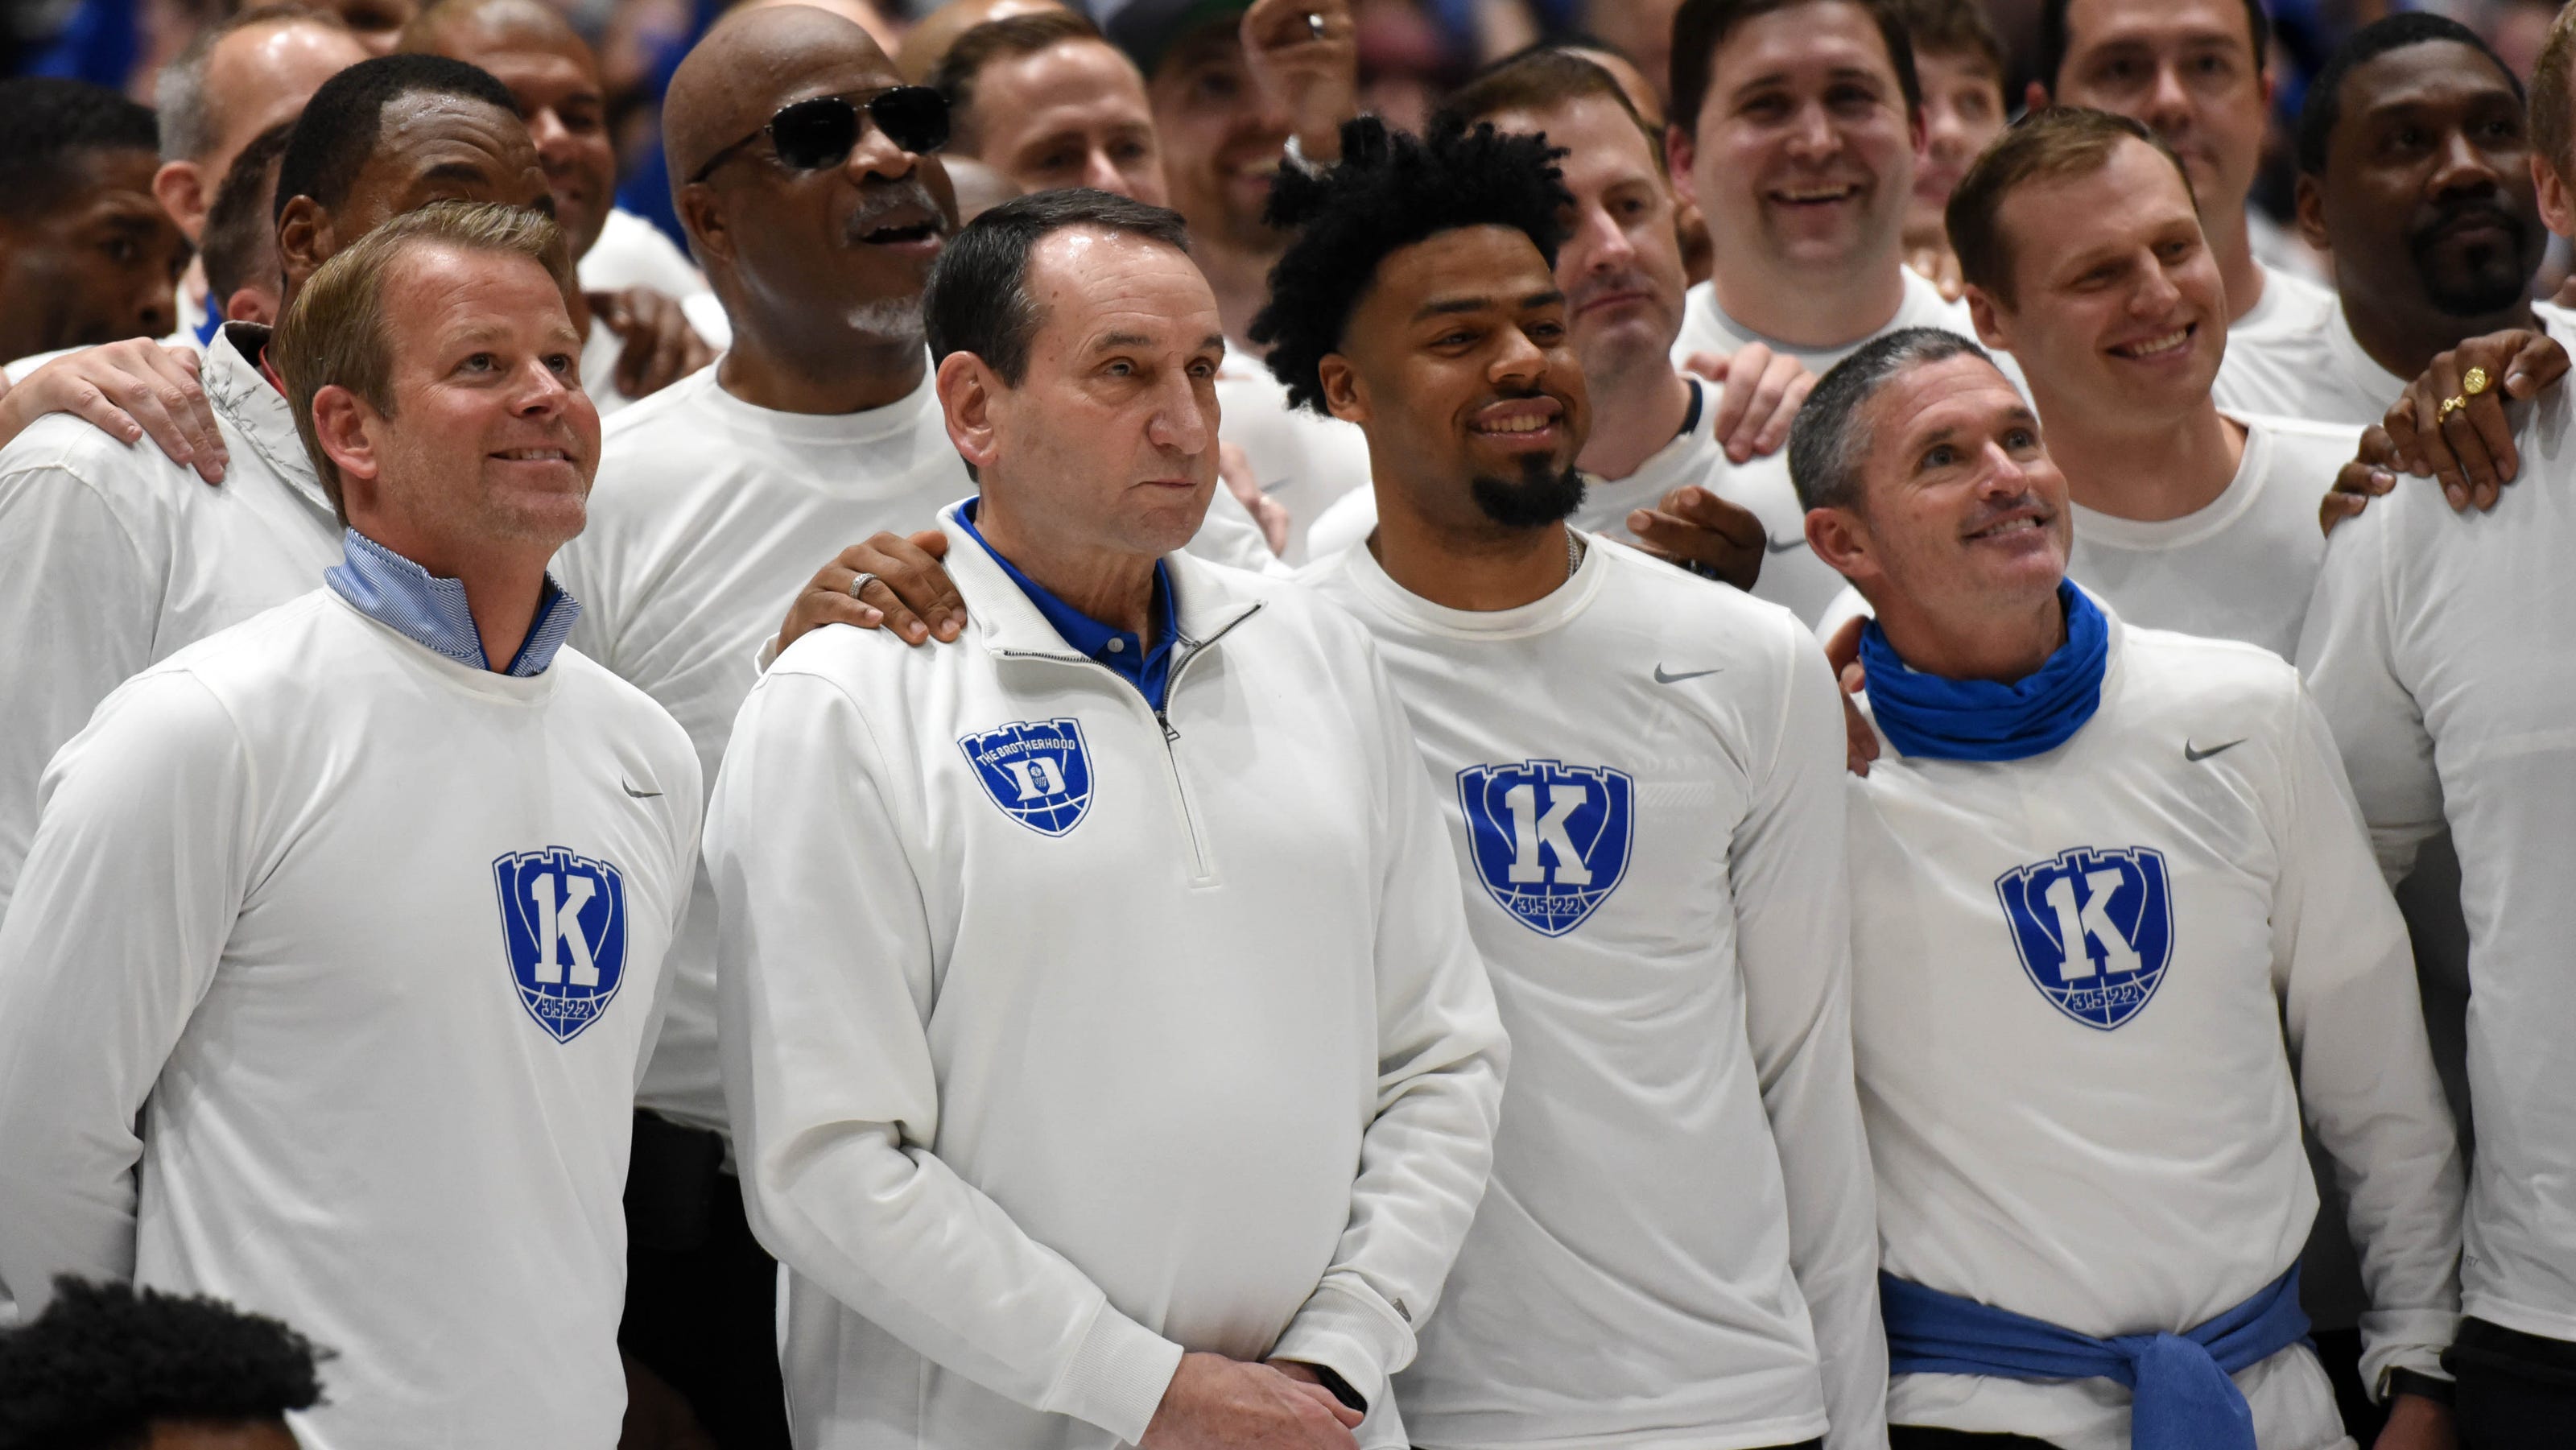 Coach K's over-the-top Duke goodbye signals fading era of star coaches